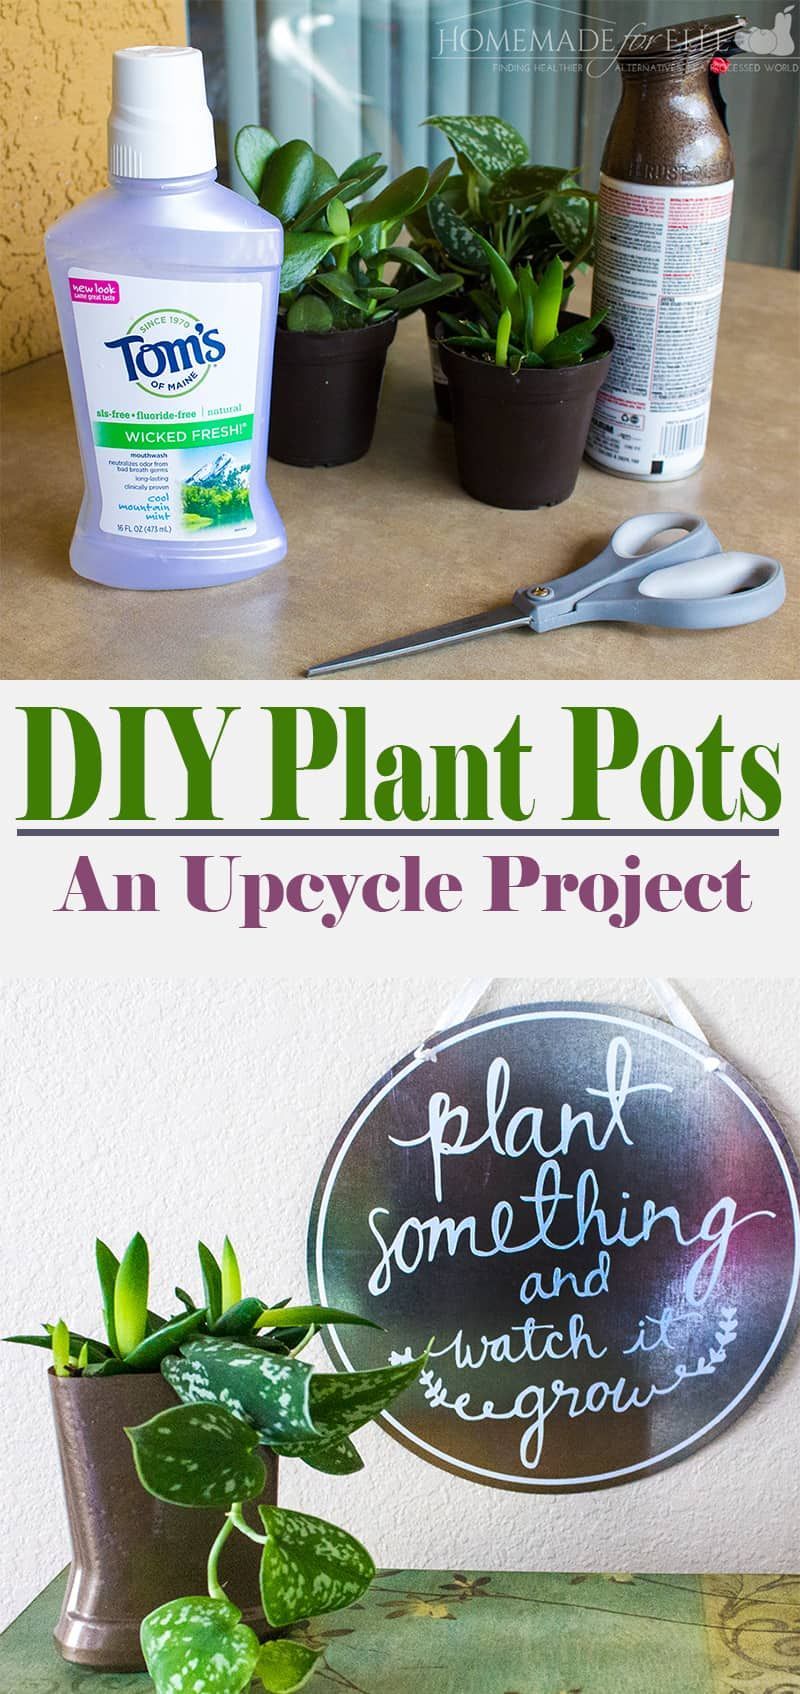 DIY Plant Pots -   14 plants Potted upcycle ideas